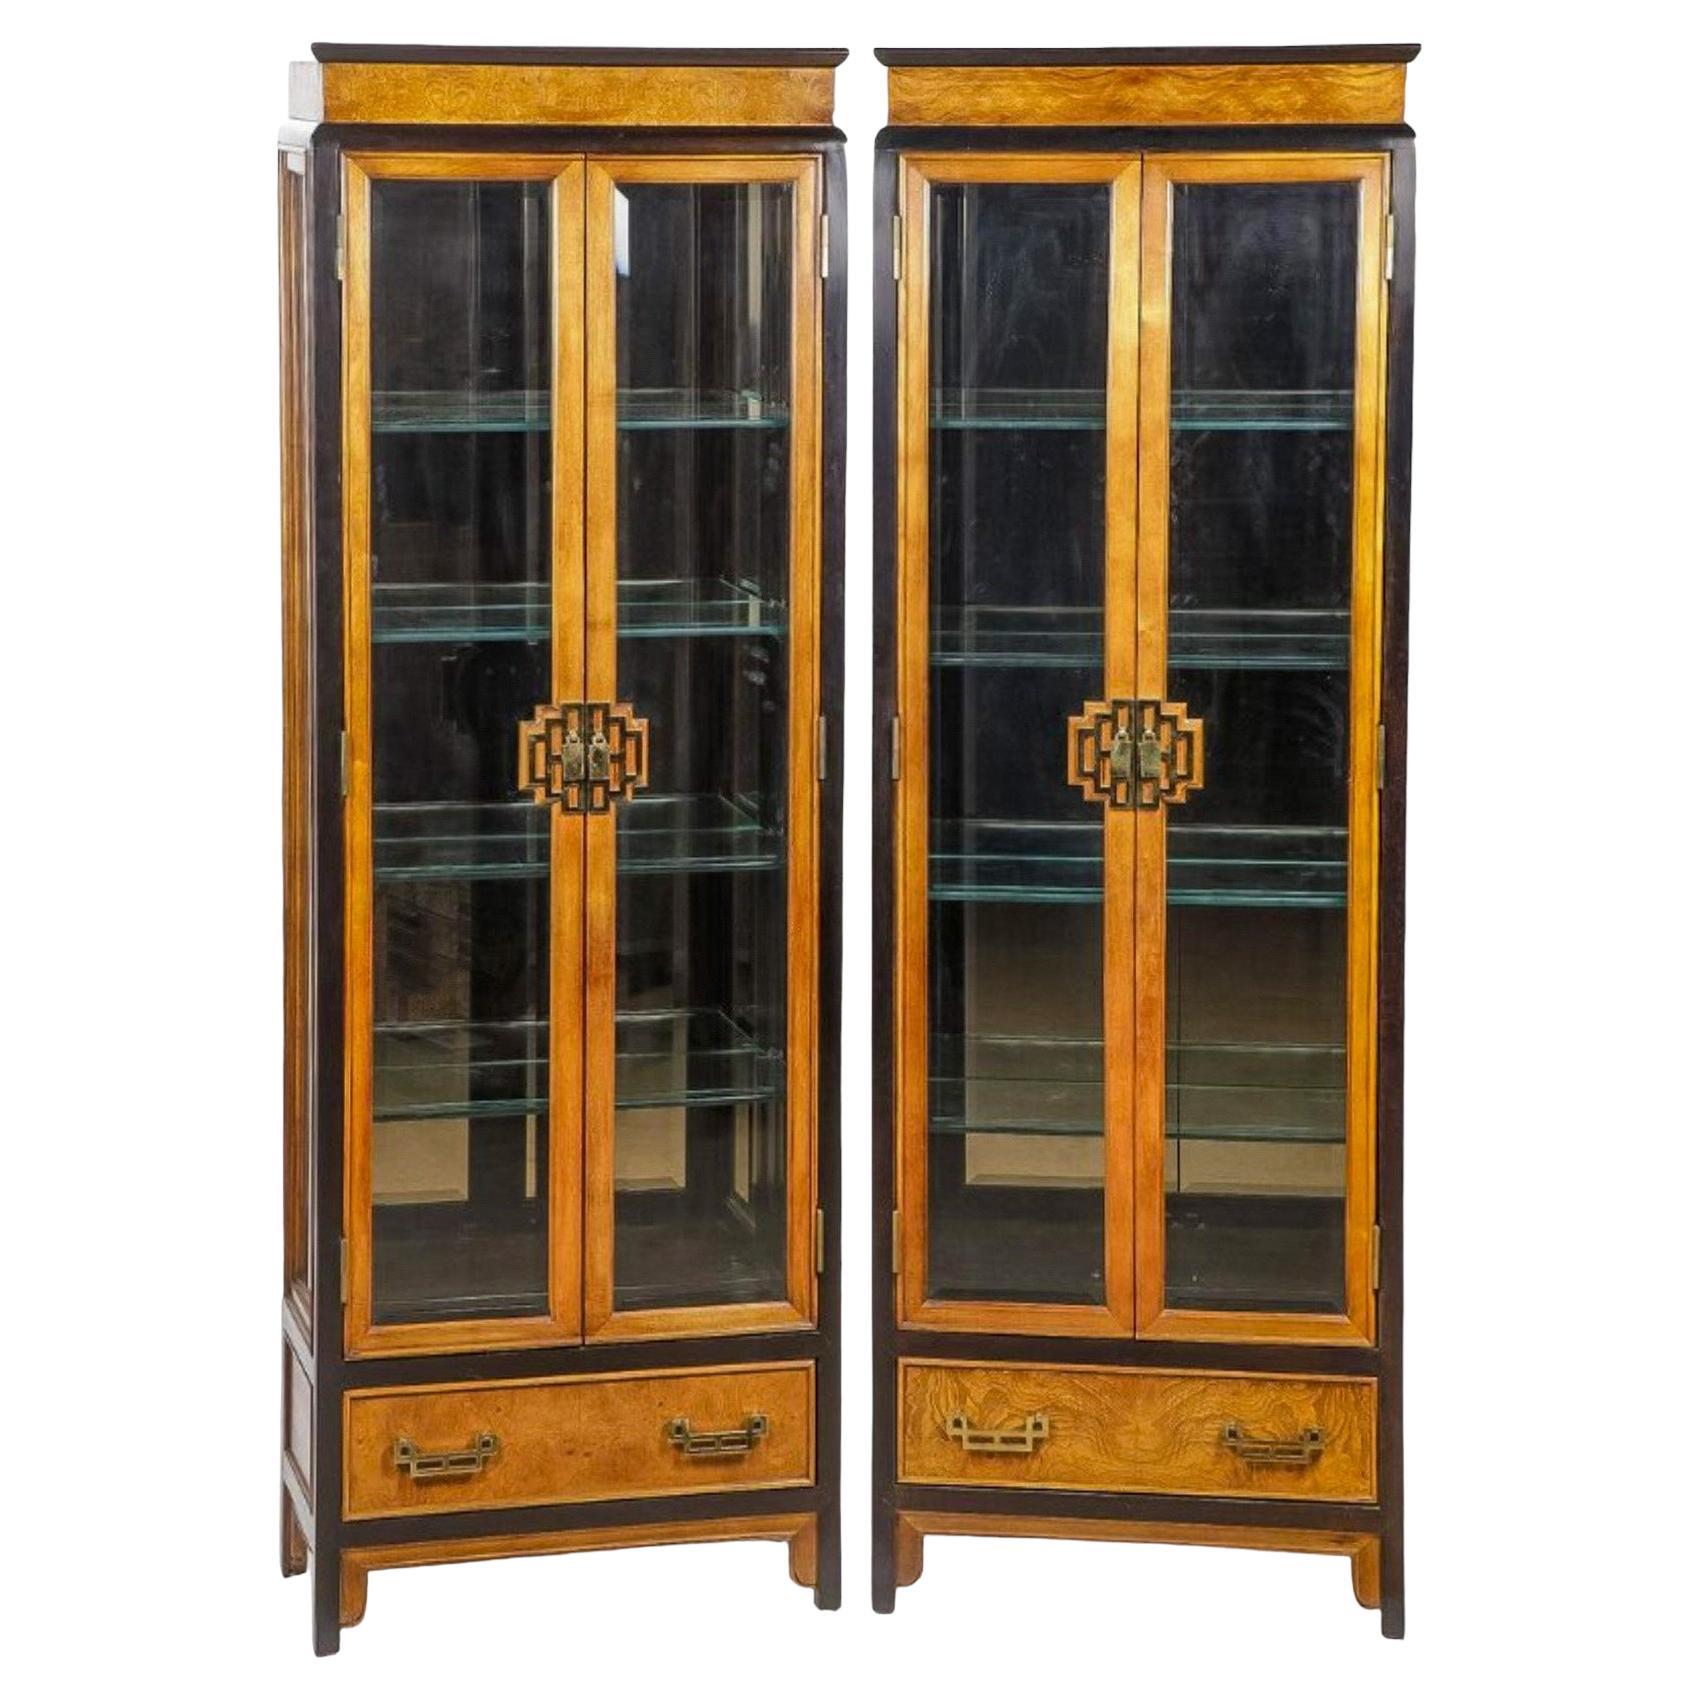 James Mont Asian Modern Style Burl & Brass Vitrines / Display Cabinets - Pair For Sale